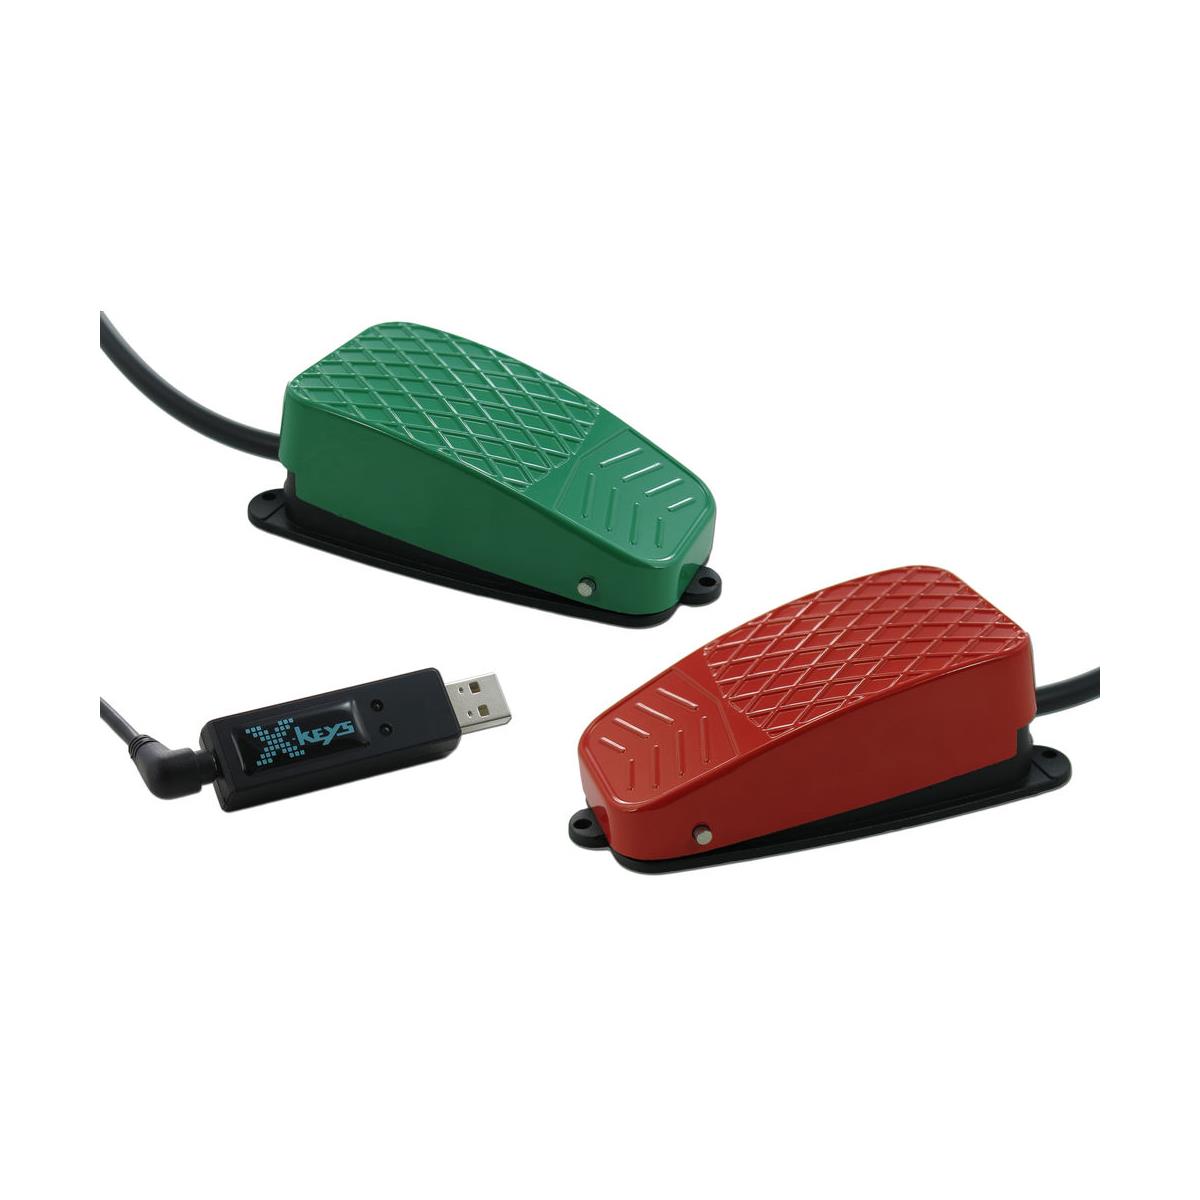 Image of X-Keys USB Three-Switch Interface with Green and Red Commercial Foot Switches